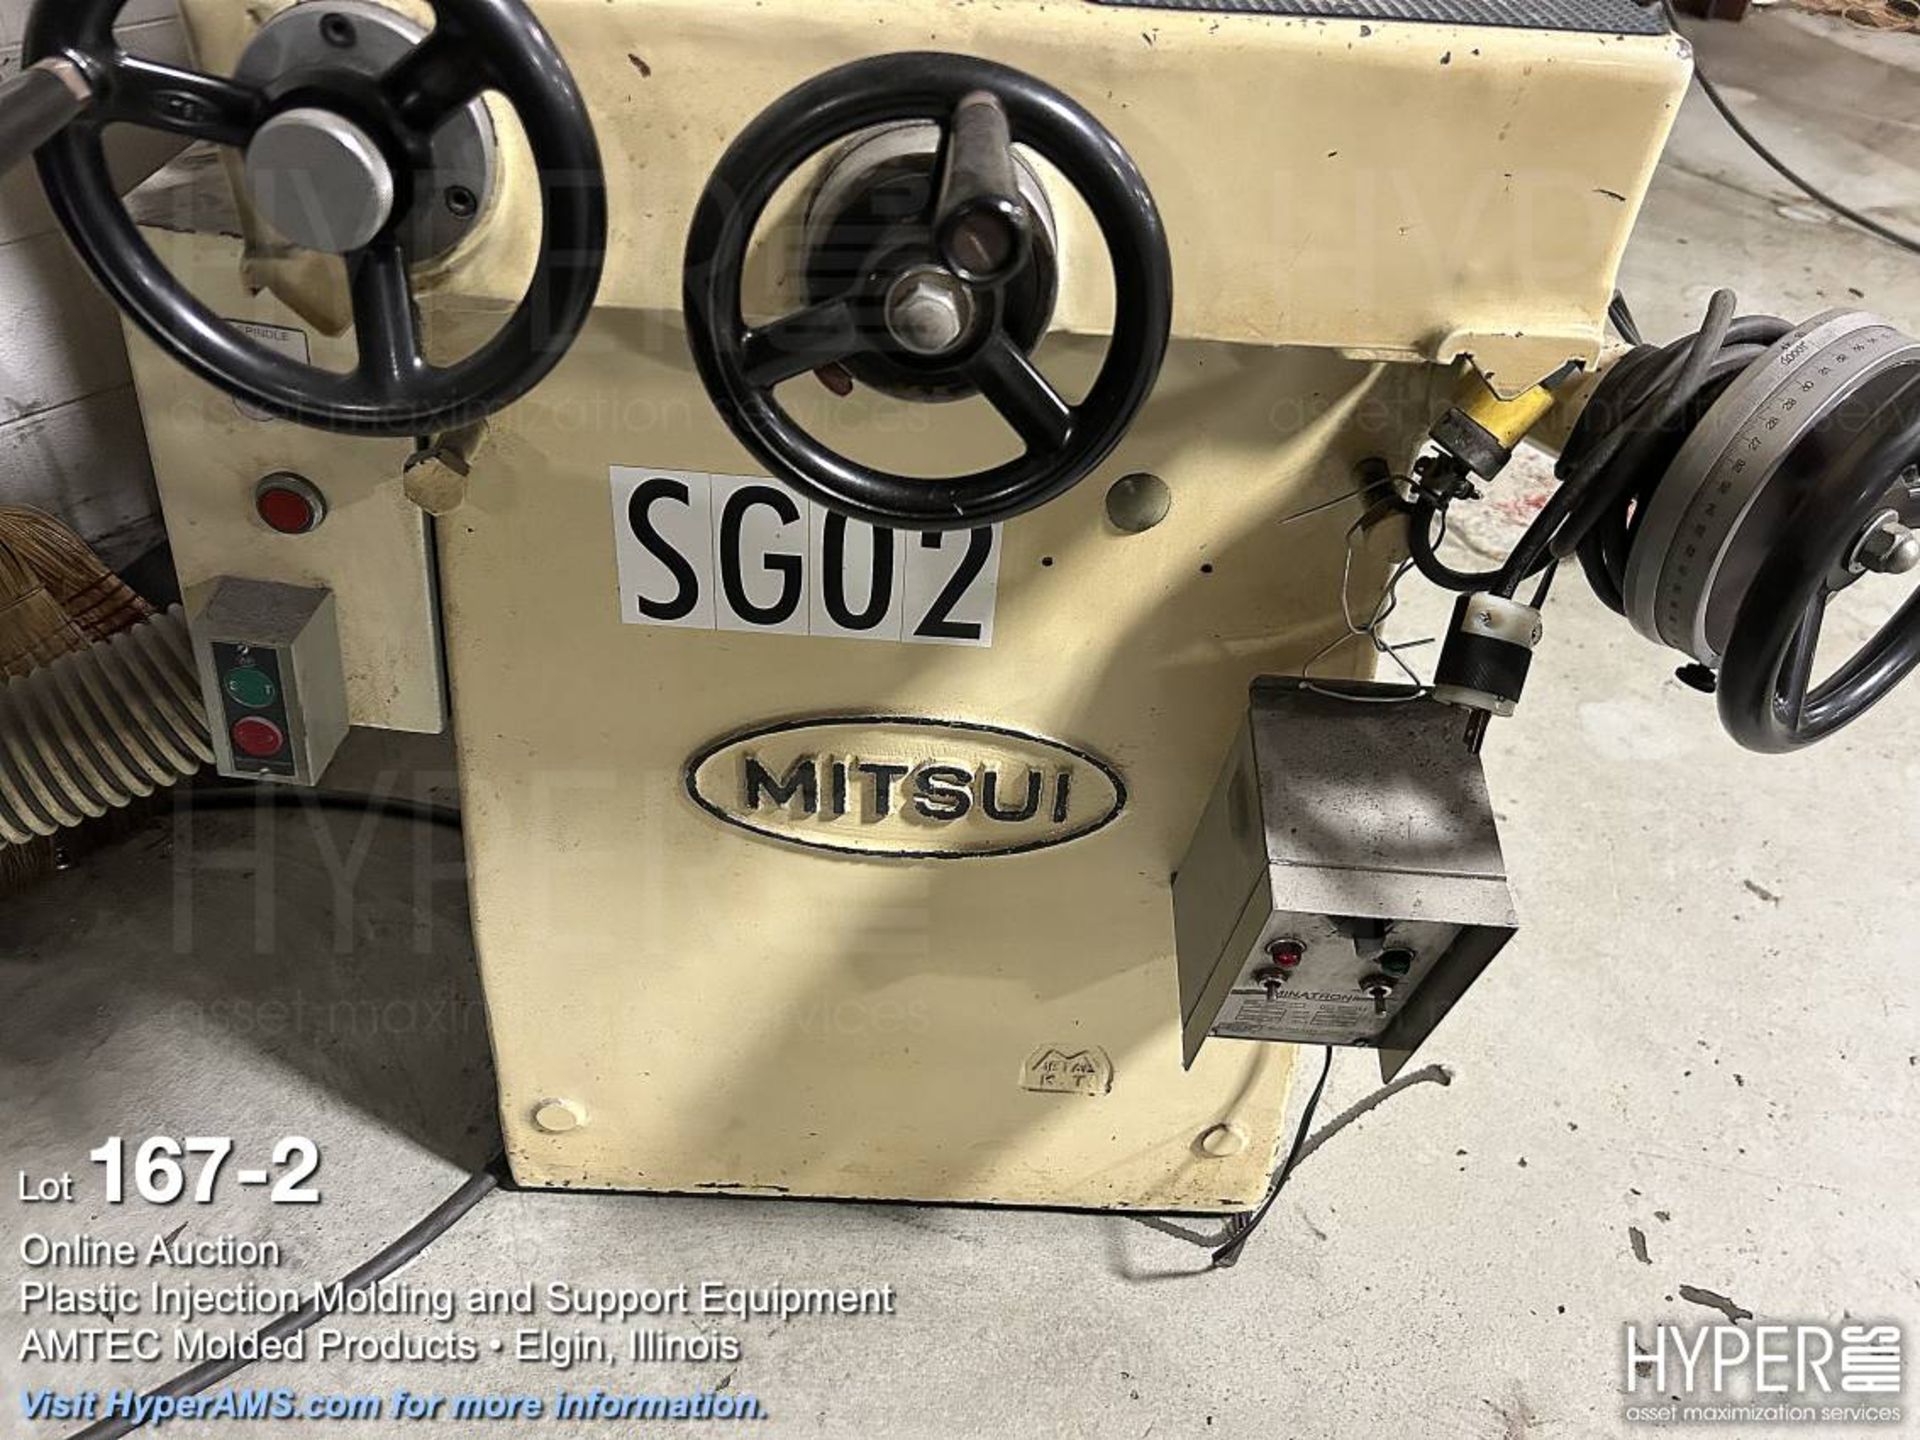 Mitsui MSG 200MH 6" x 12" hand feed surface grinder - Image 2 of 5